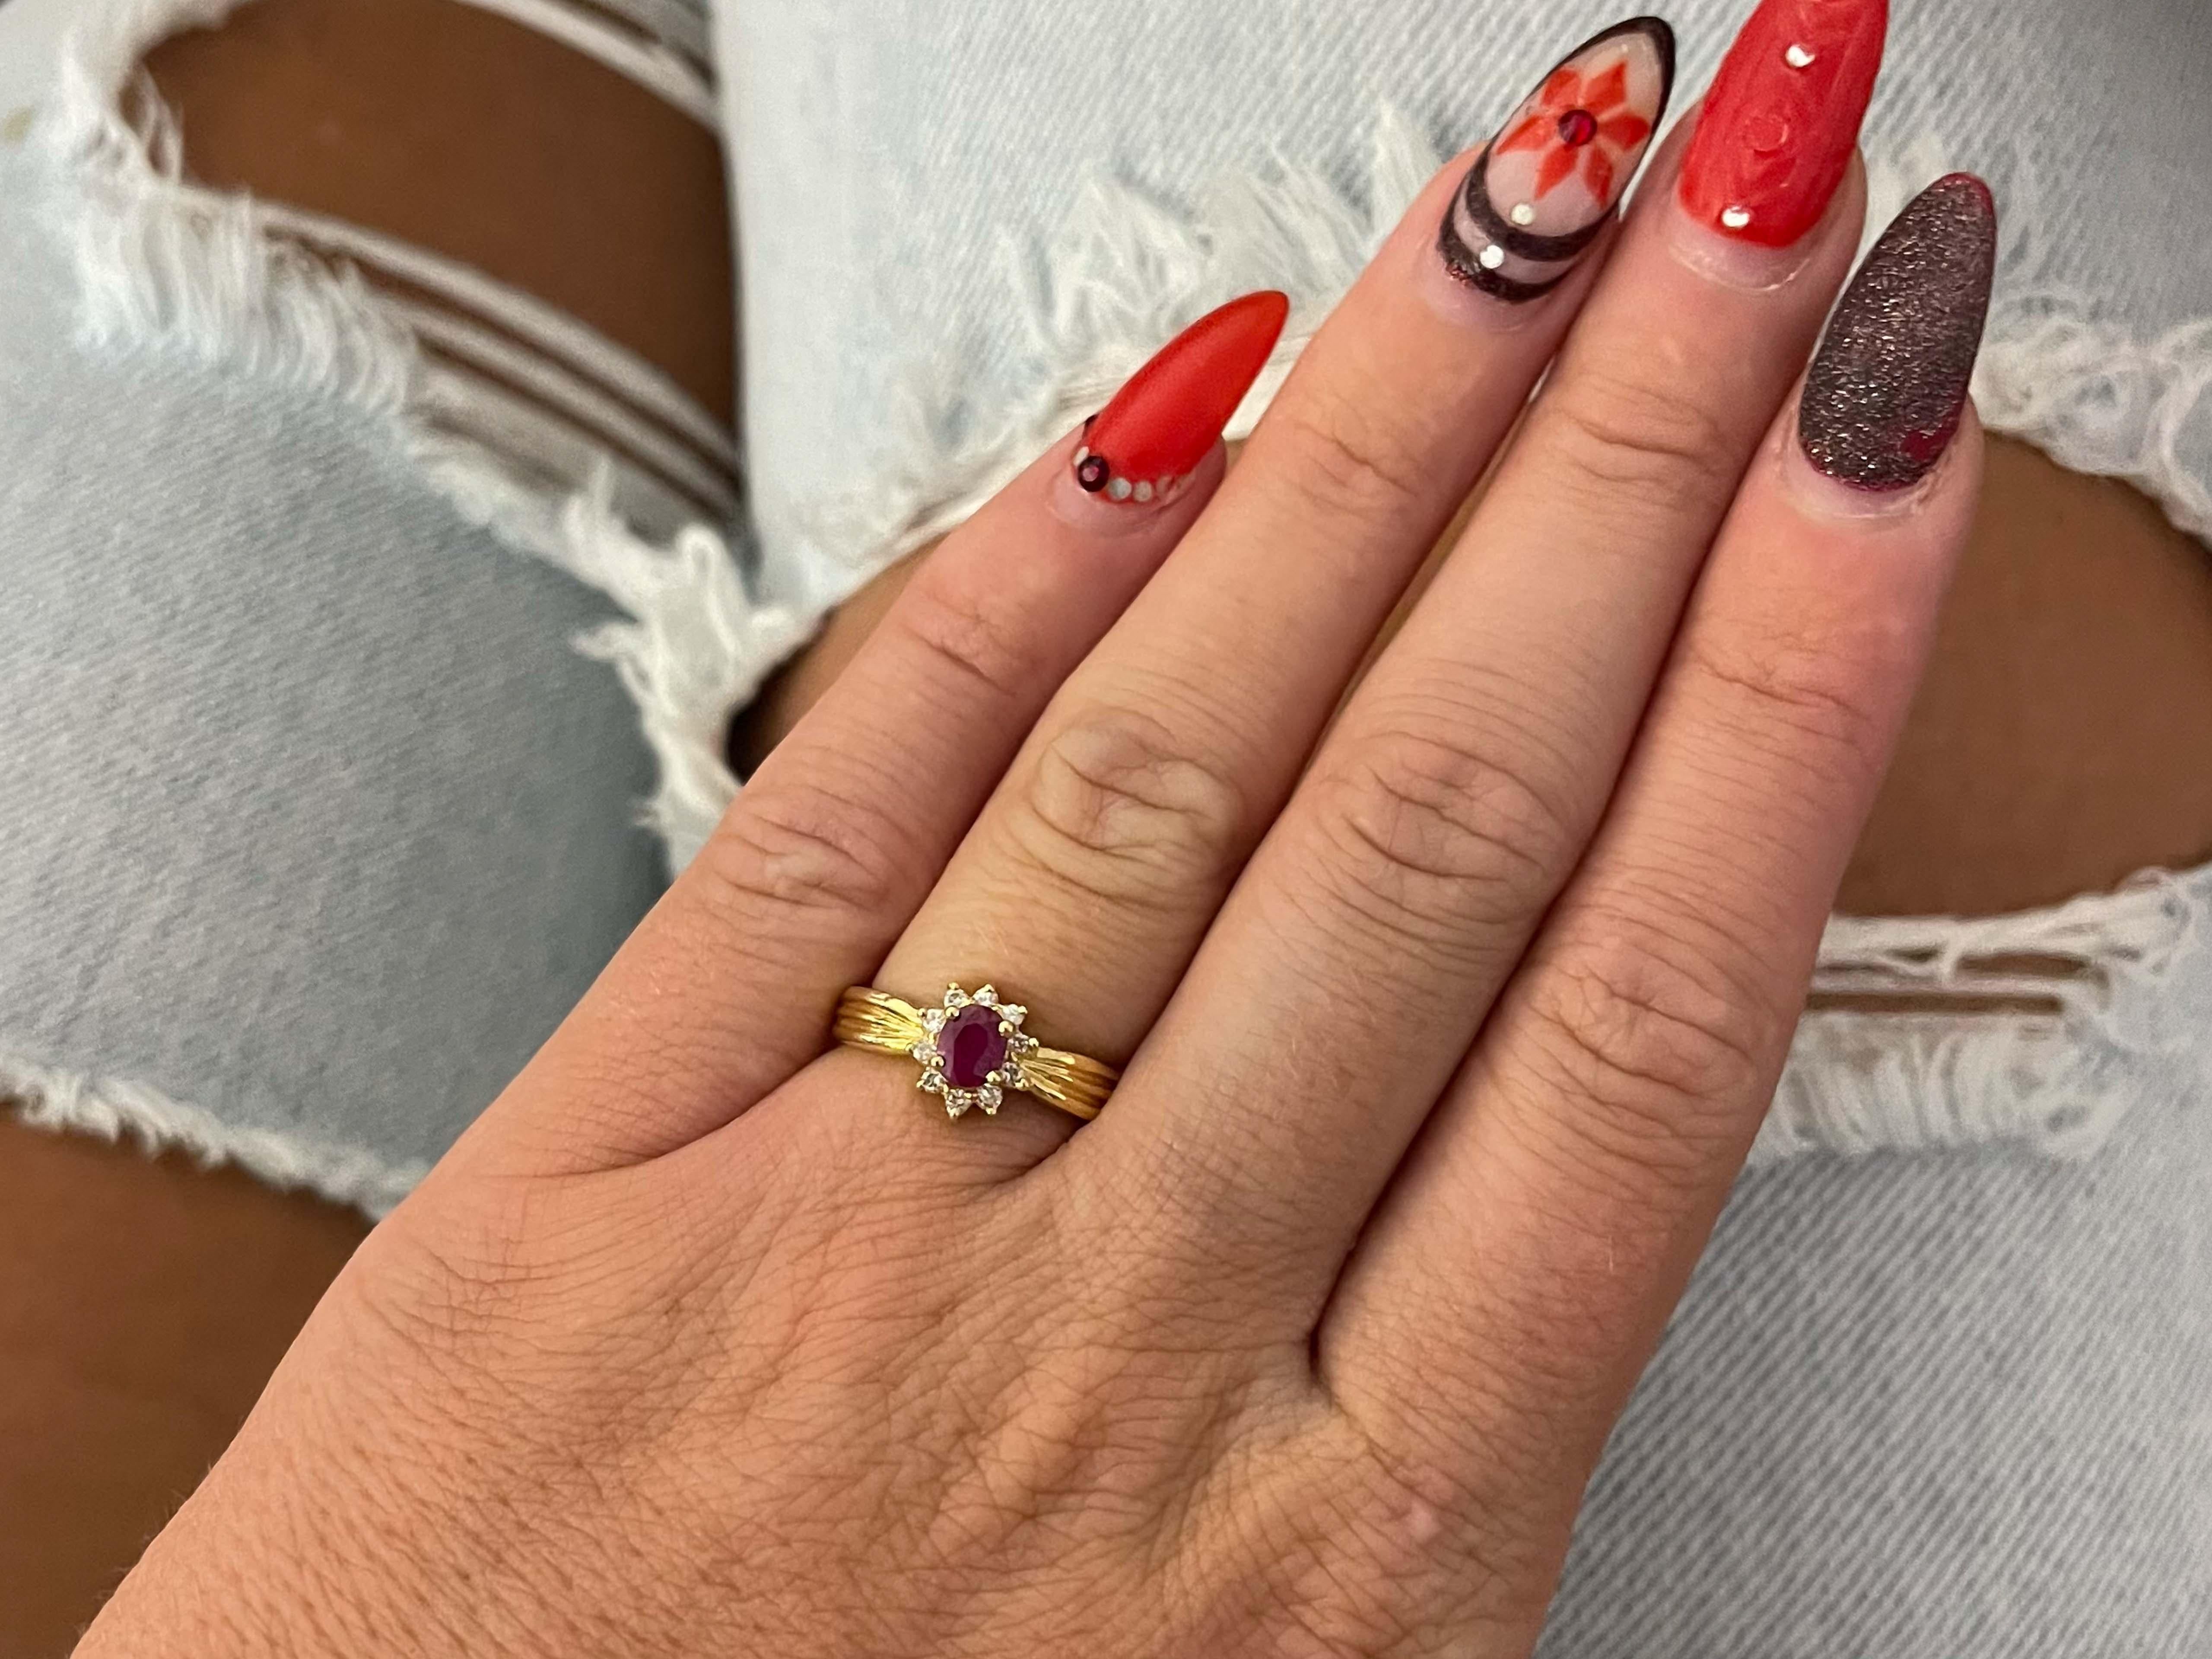 Item Specifications:

Metal: 14K Yellow Gold

Style: Statement Ring

Ring Size: 6.25 (resizing available for a fee)

Total Weight: 3.6 Grams

Ring Height: 9 mm

Gemstone Specifications:

Gemstone: 1 Ruby

Shape: Oval

Ruby Measurements: ~ 5.12mm x